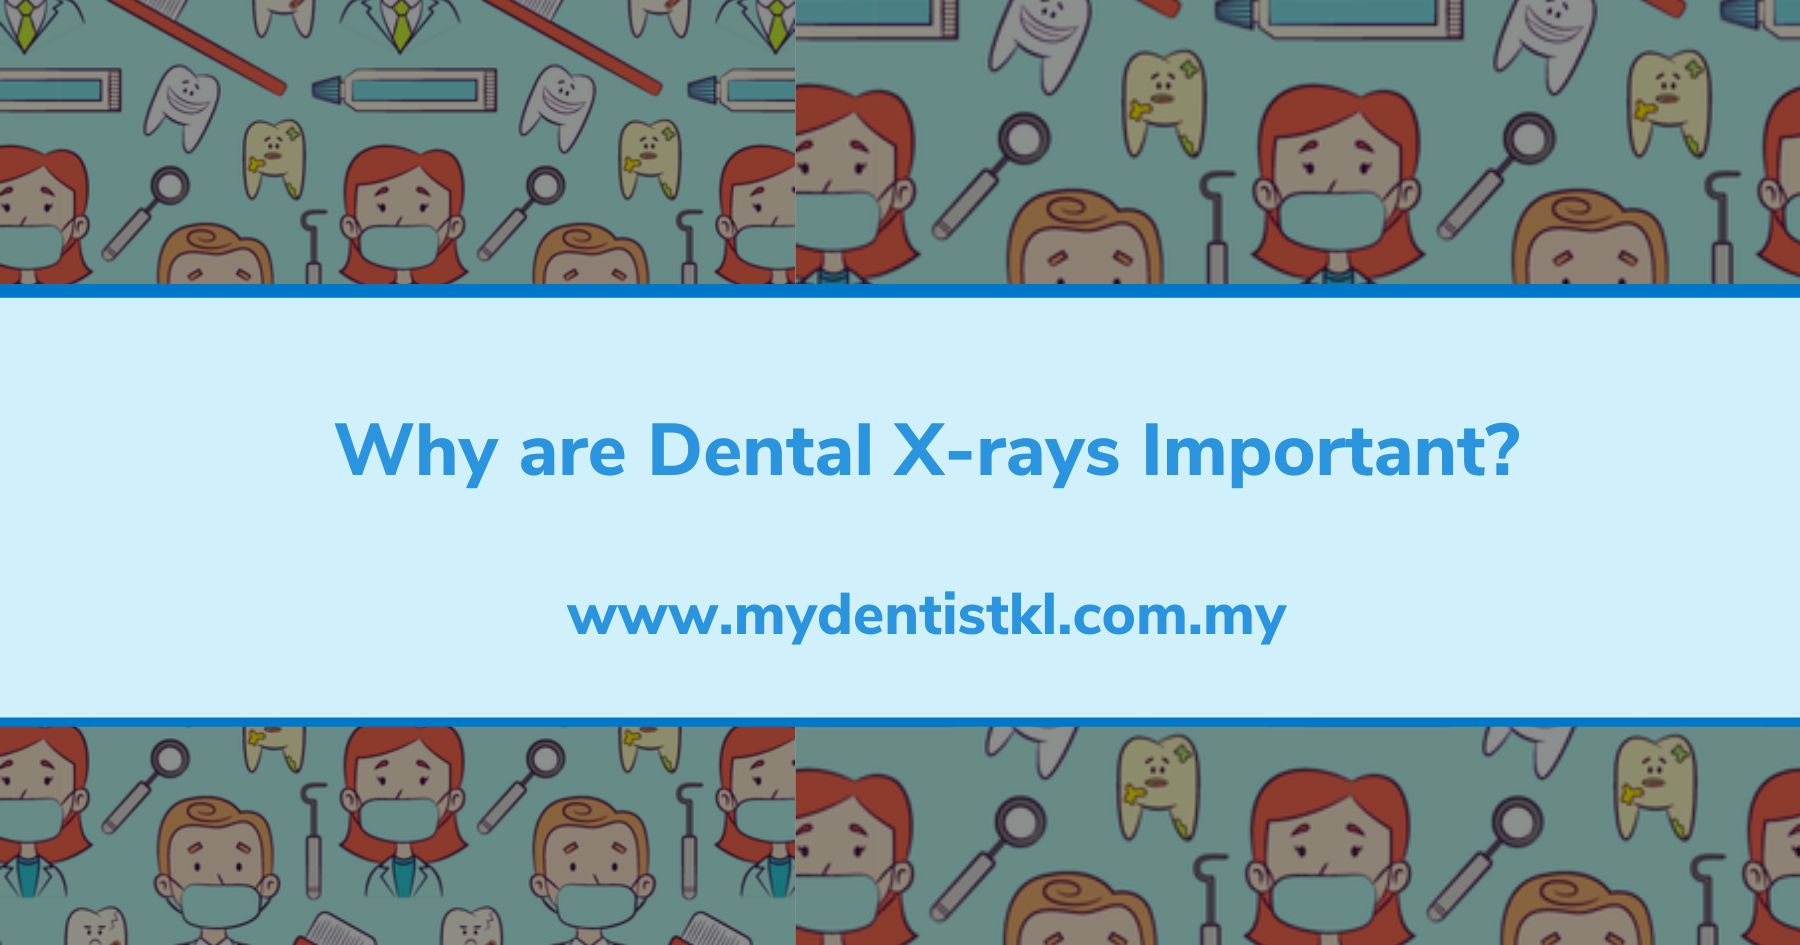 Why are Dental X-rays Important?